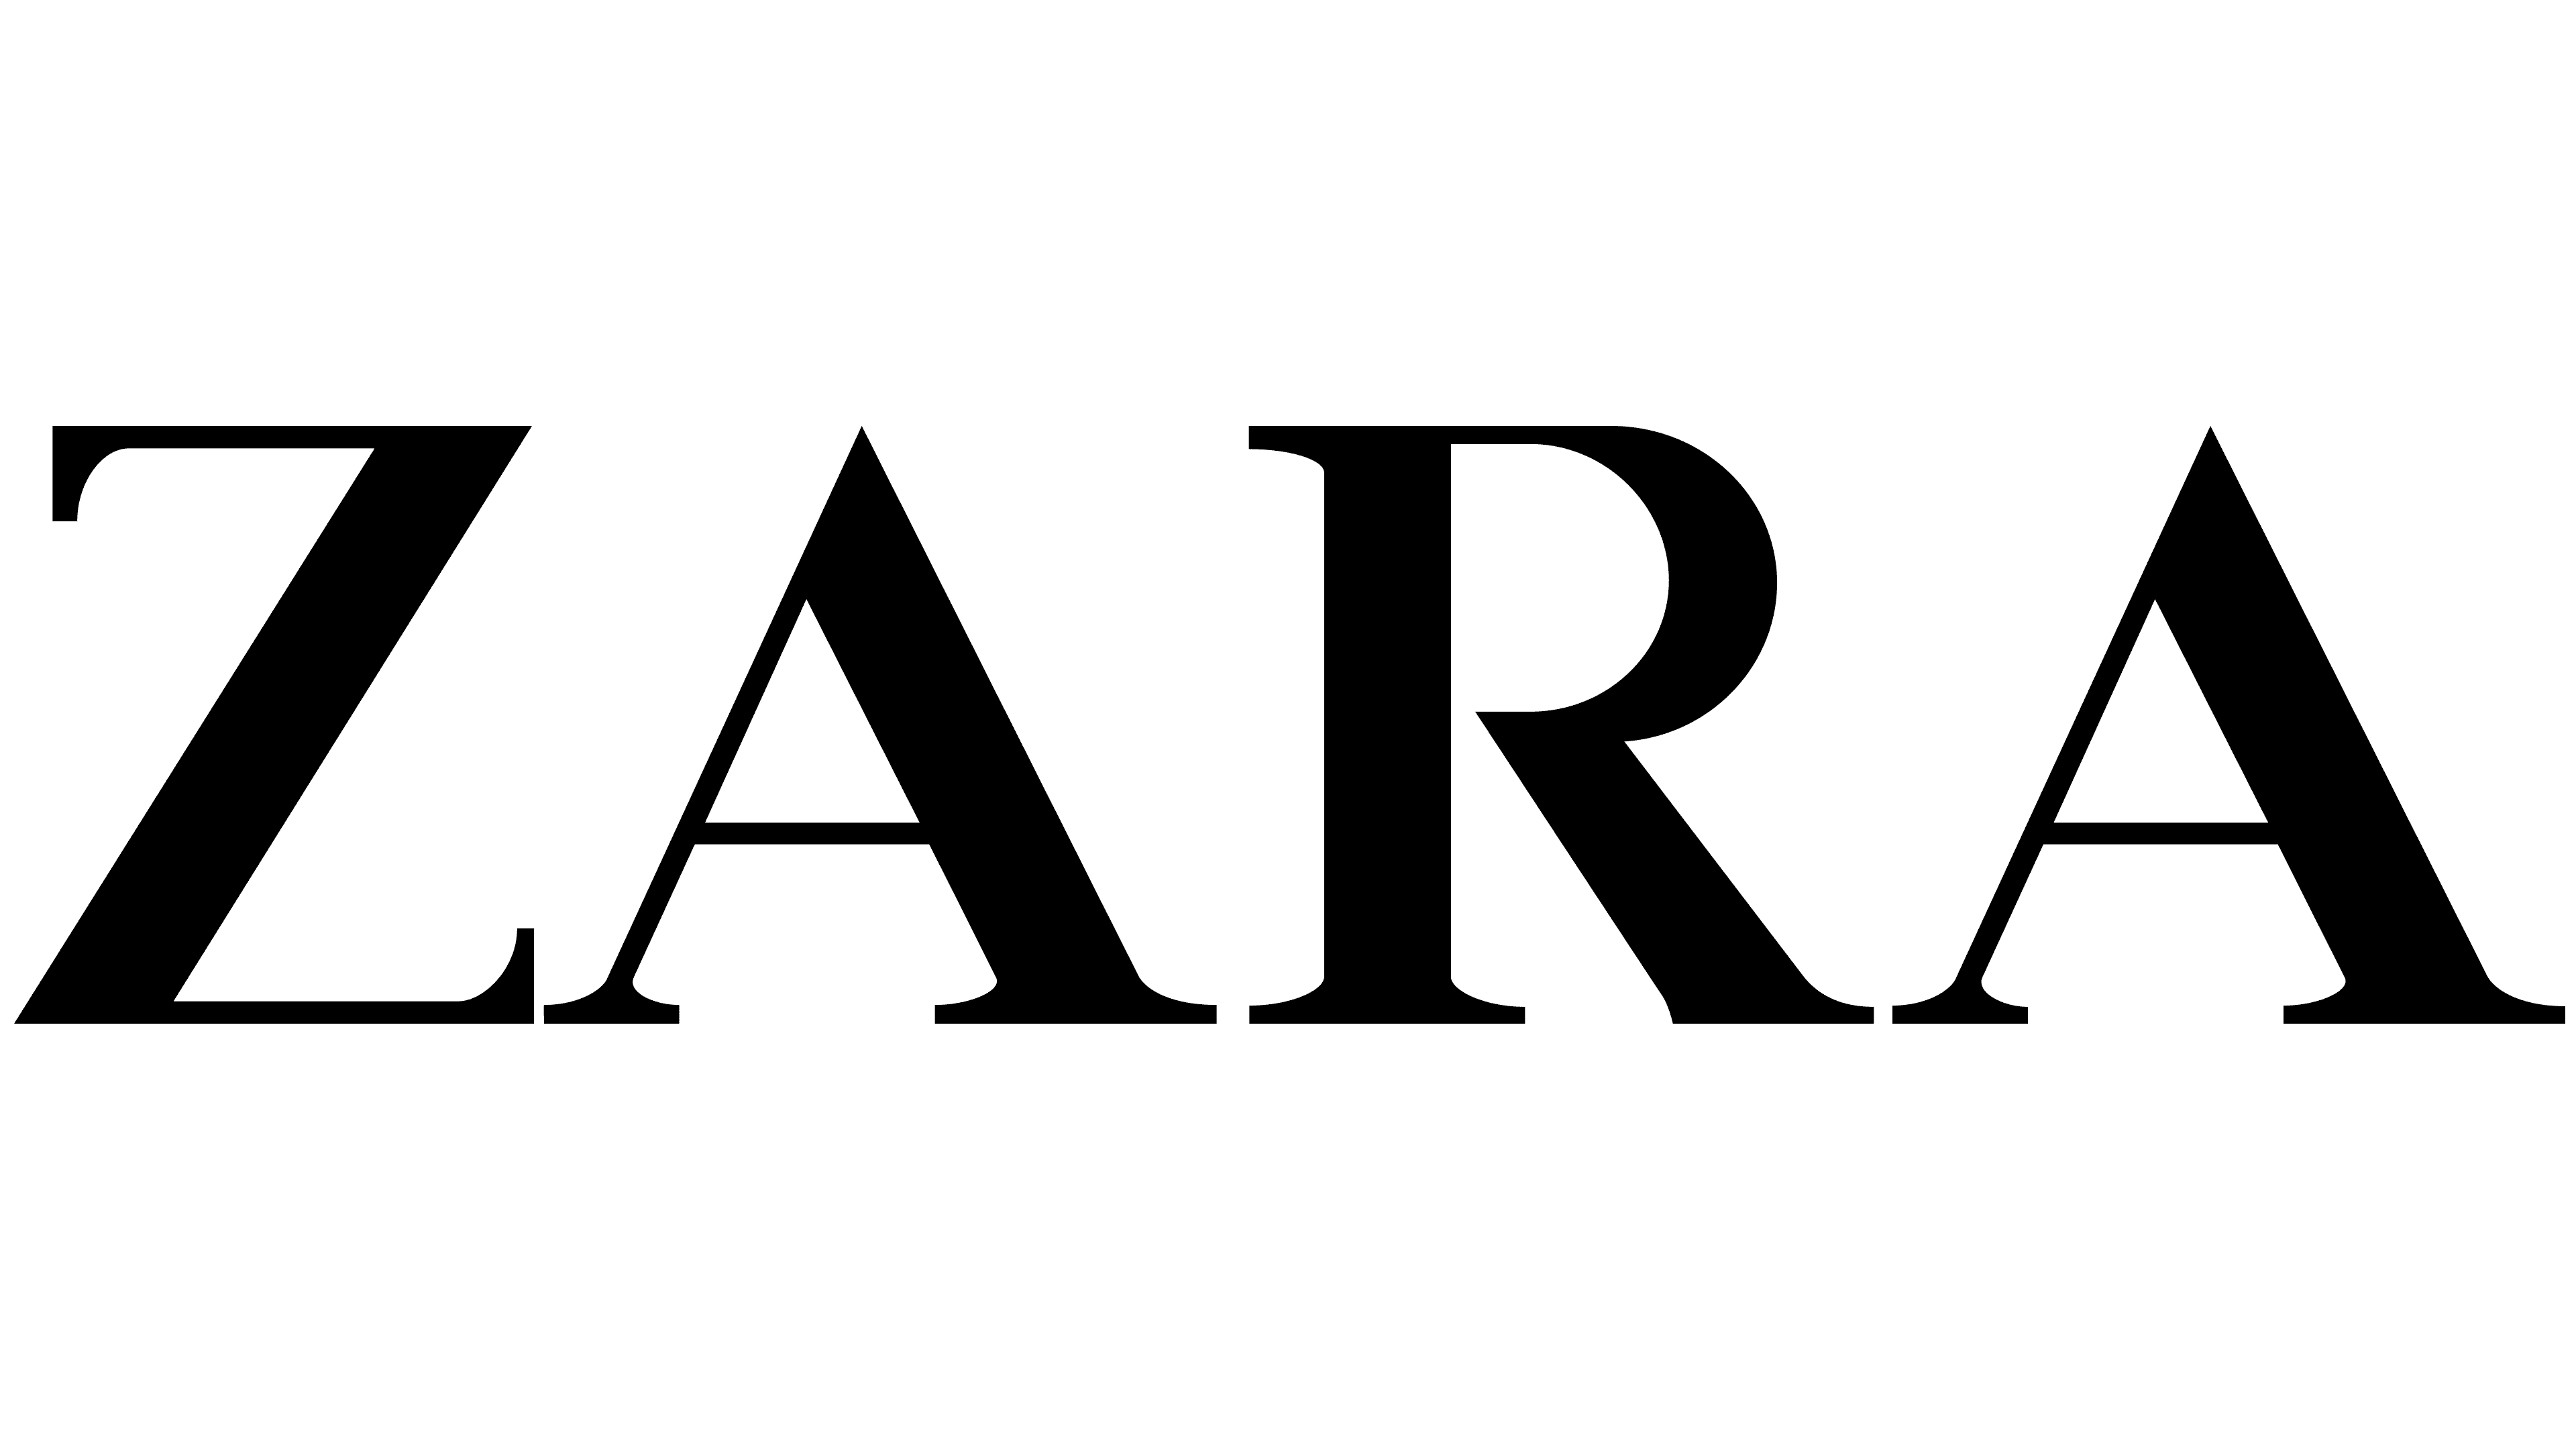 Zara Logo | The most famous brands and 